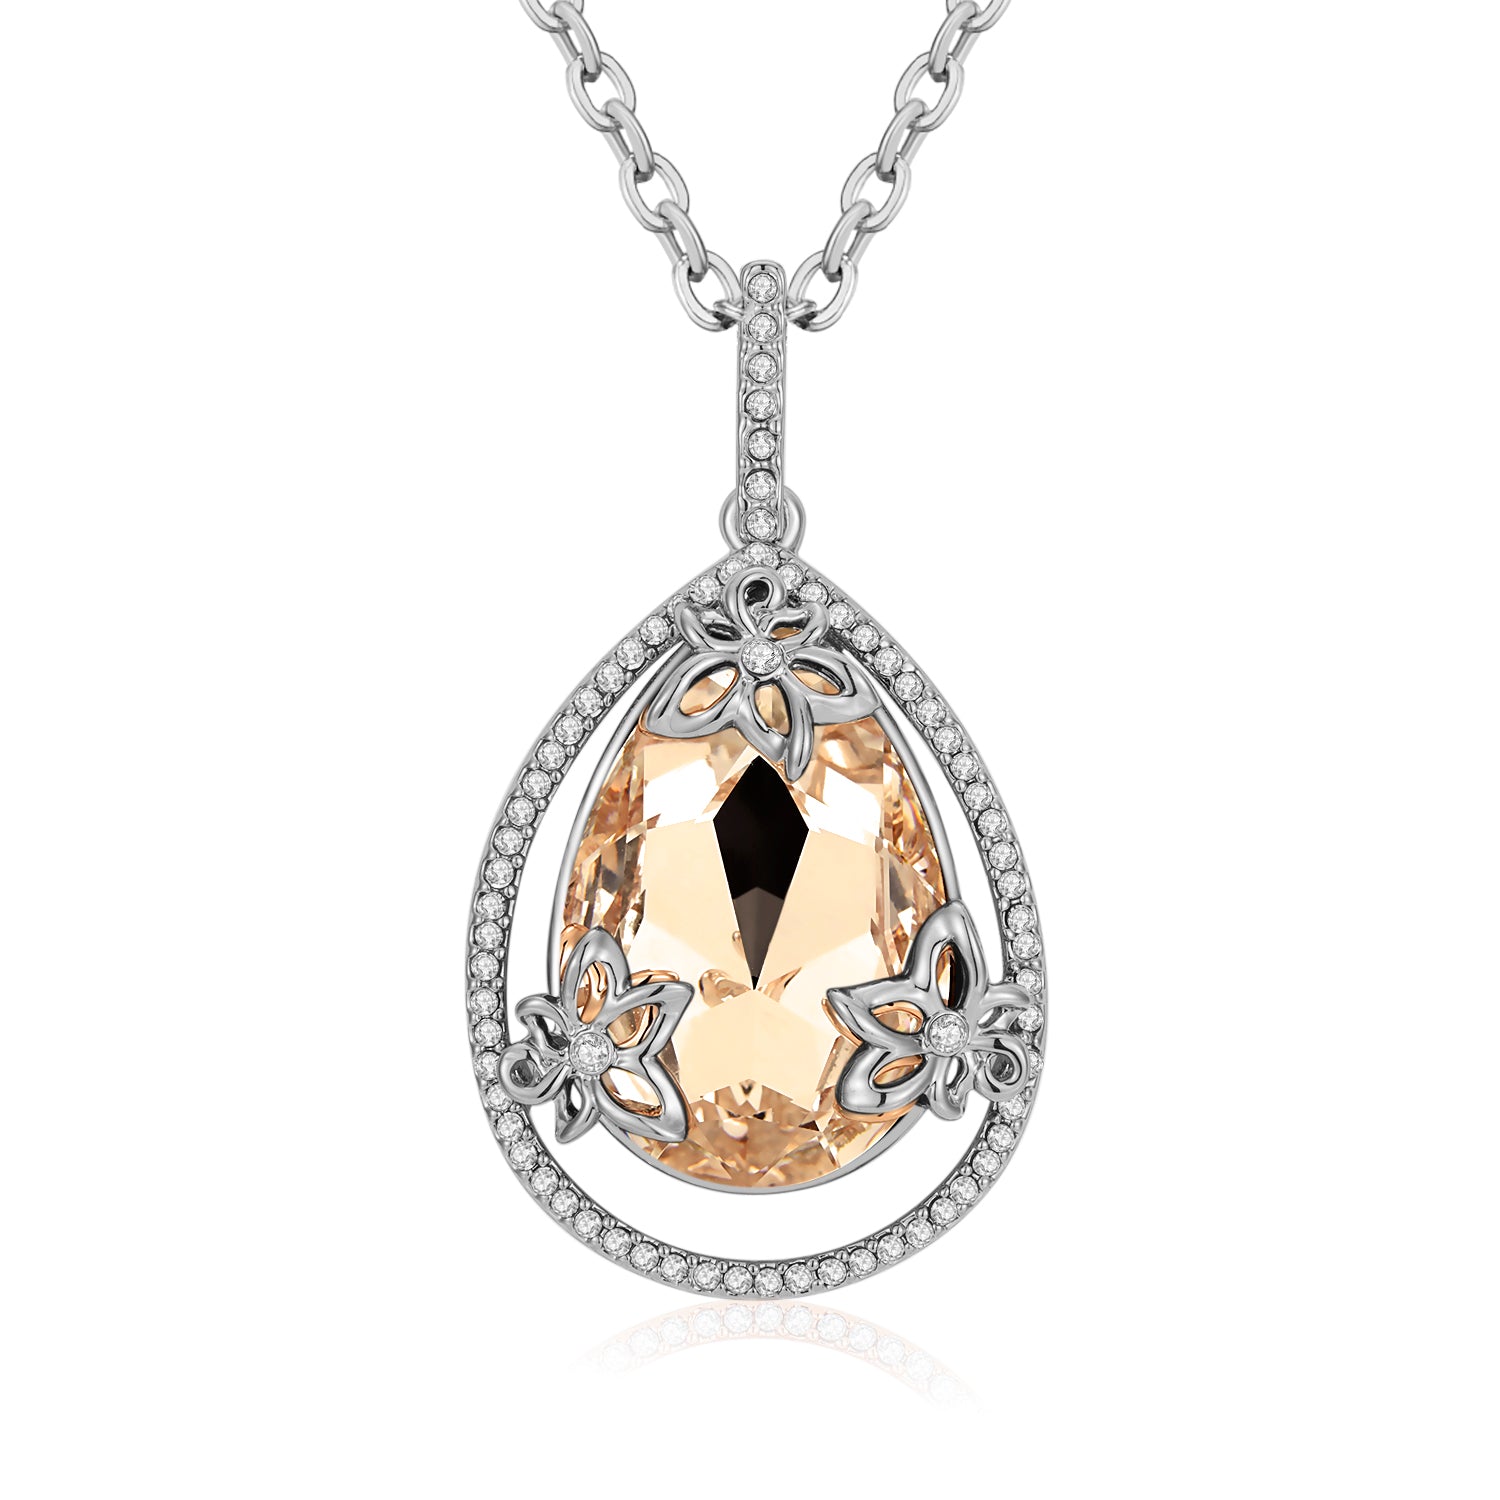 Beautiful legend VICACCI Mermaid tears Pendant necklace Embellished with crystals